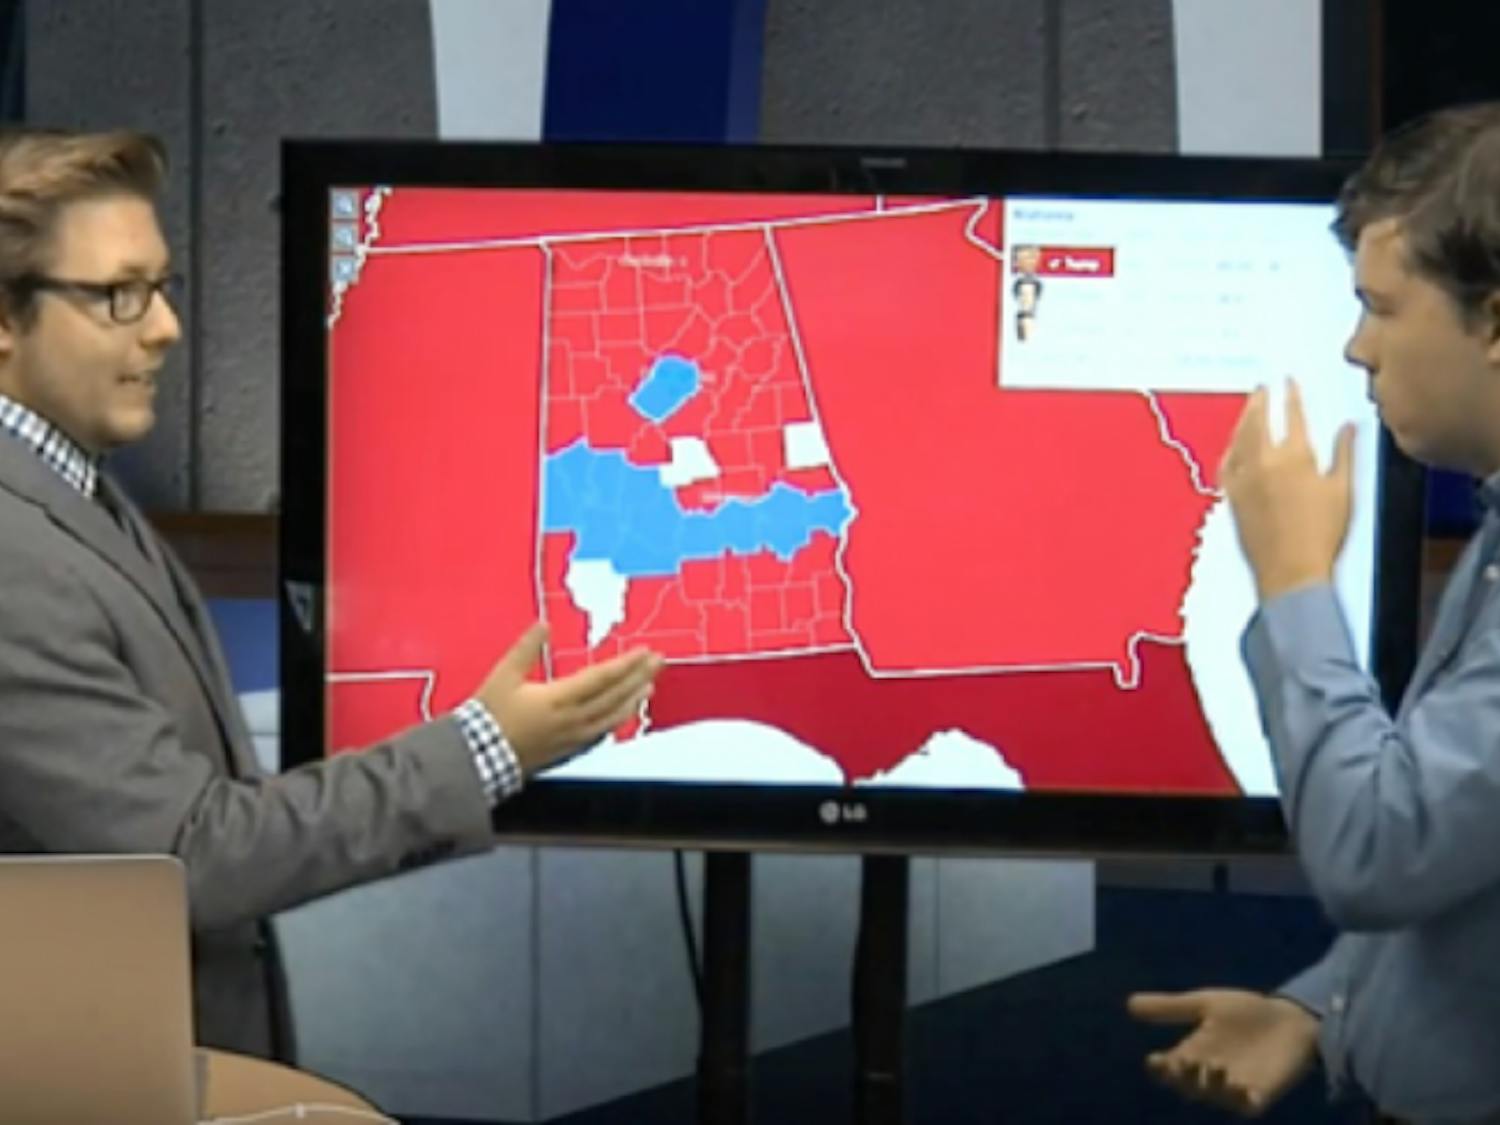 Ryan and Evan break down election county by county in Alabama